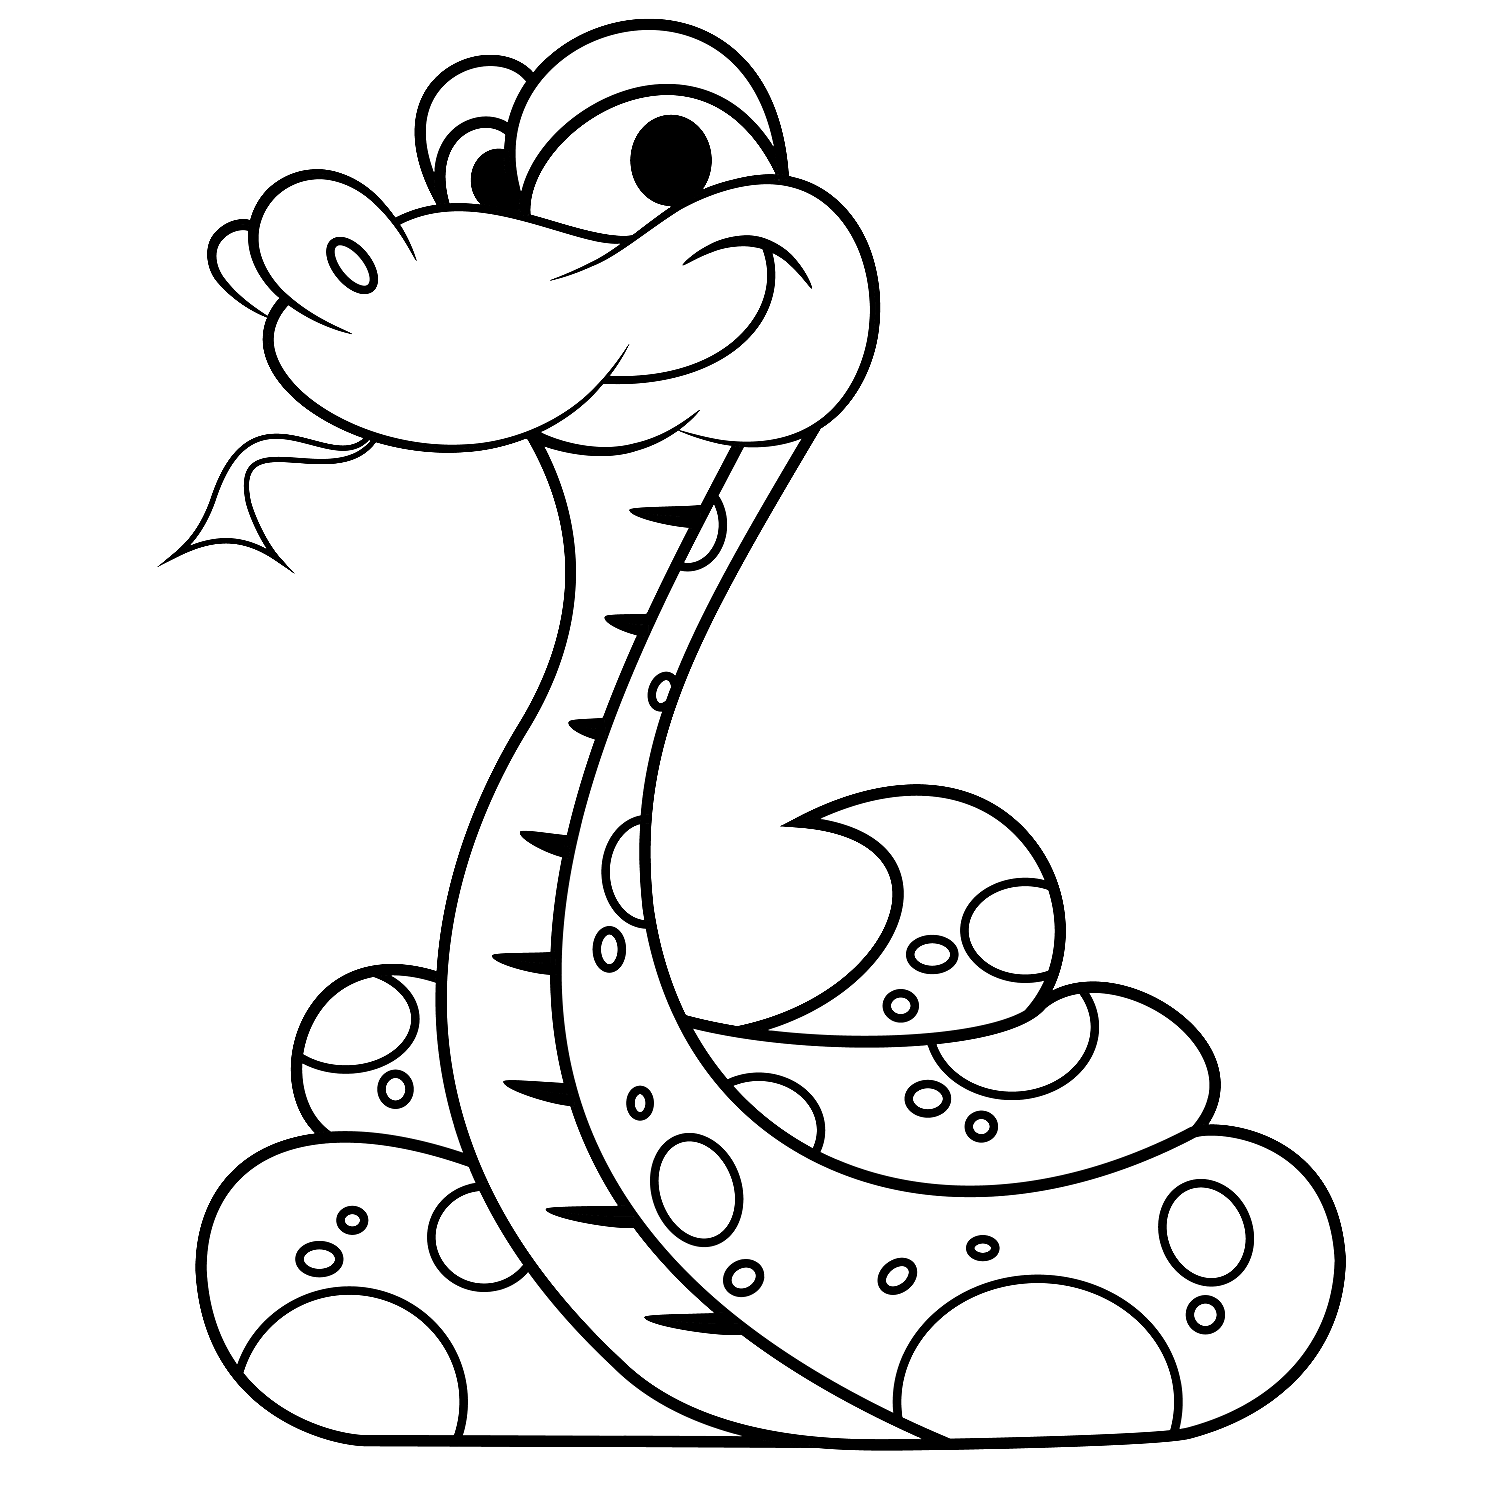 snake coloring page coloring pages snakes coloring pages free and printable coloring page snake 